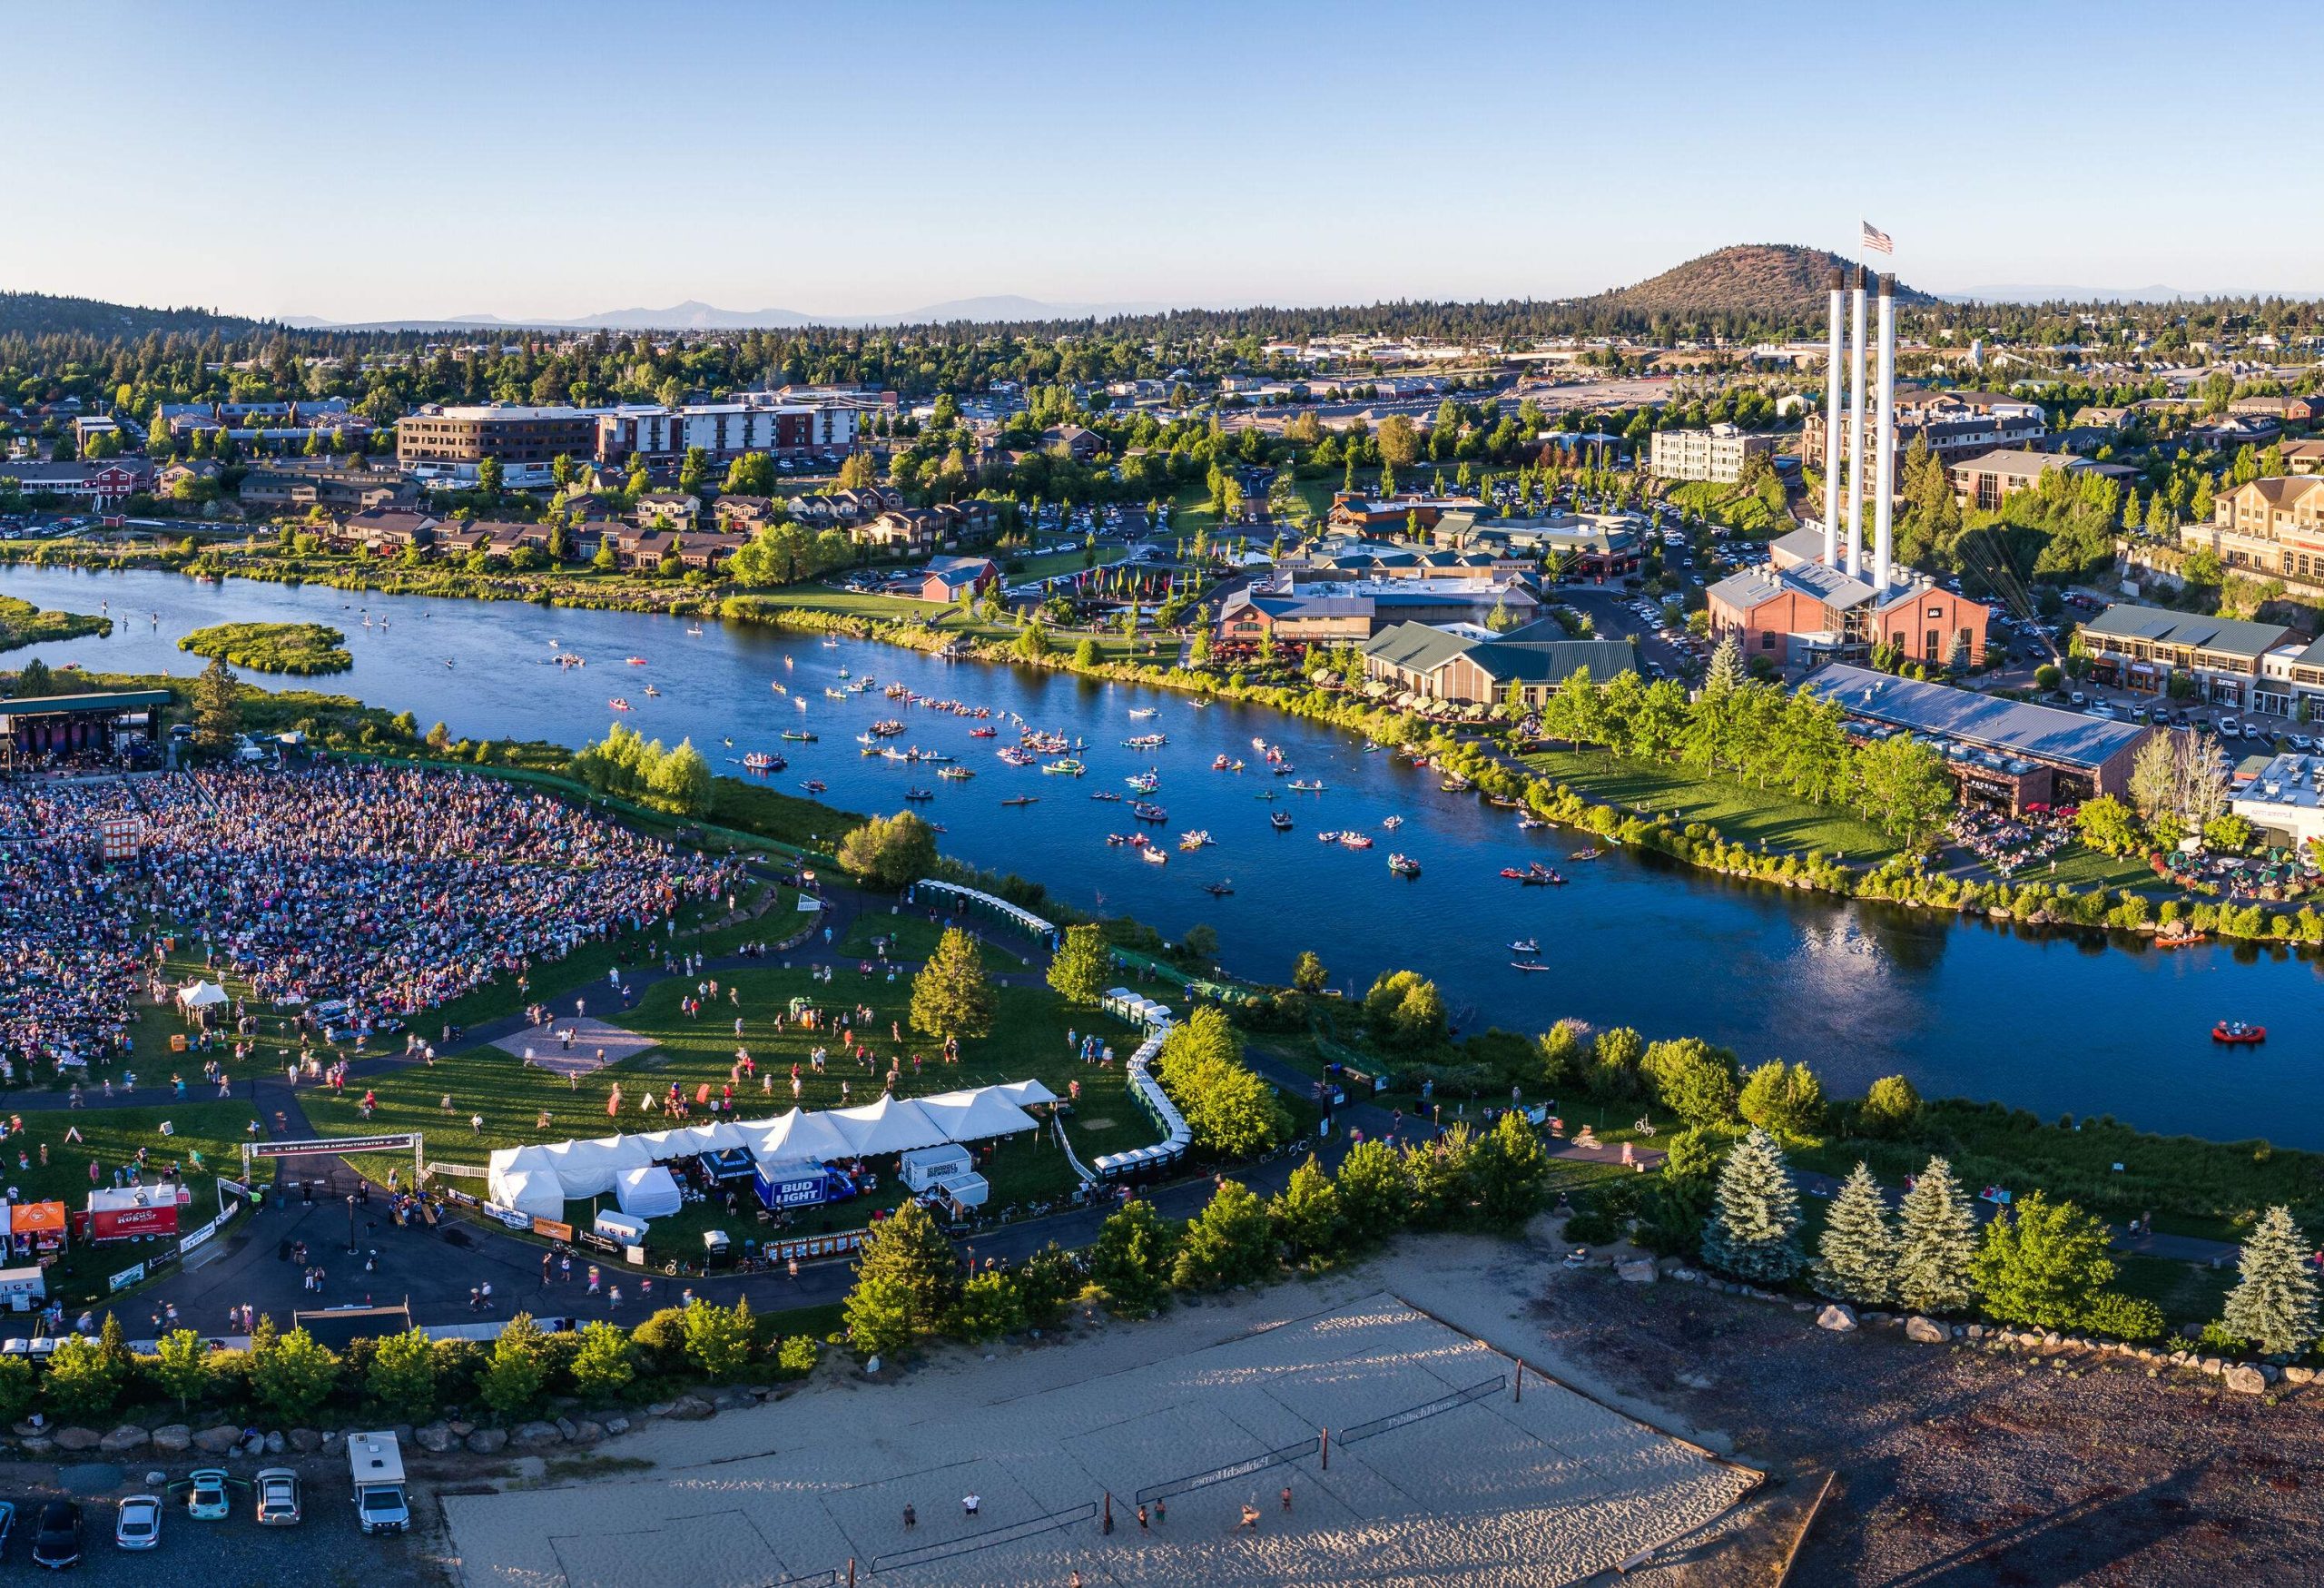 A river across the urban landscape of a small city and a crowded concert ground.